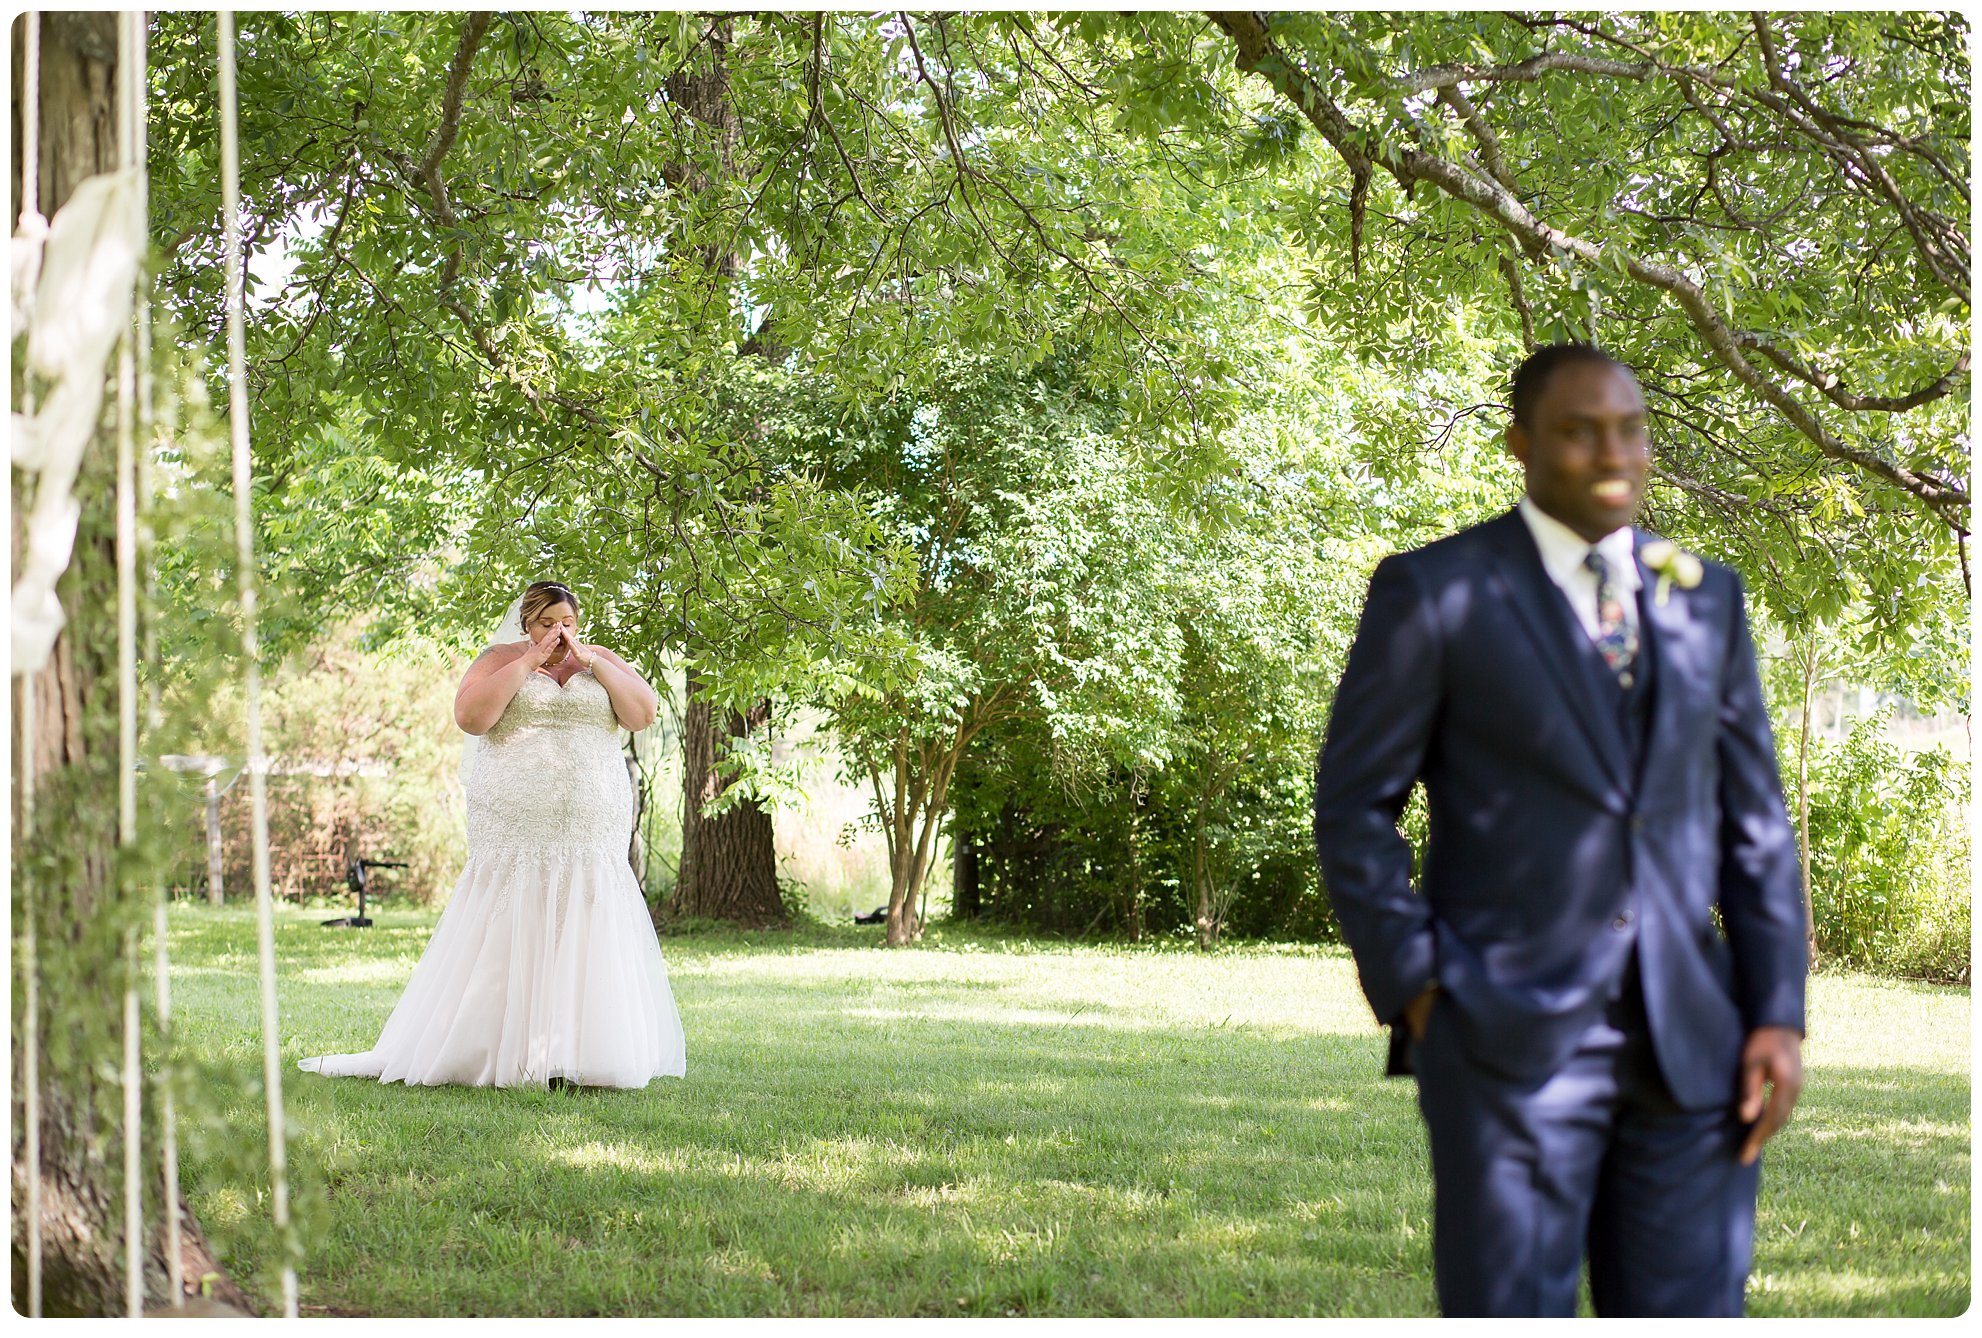 Nashville wedding at Iriswoods, Southern Belles and Blooms, navy tuxedo, whimsical garden wedding, southern wedding, southern bride, nashville bride, melanie grady photography, the best nashville wedding photographer, interracial couple wedding, mt juliet, first look